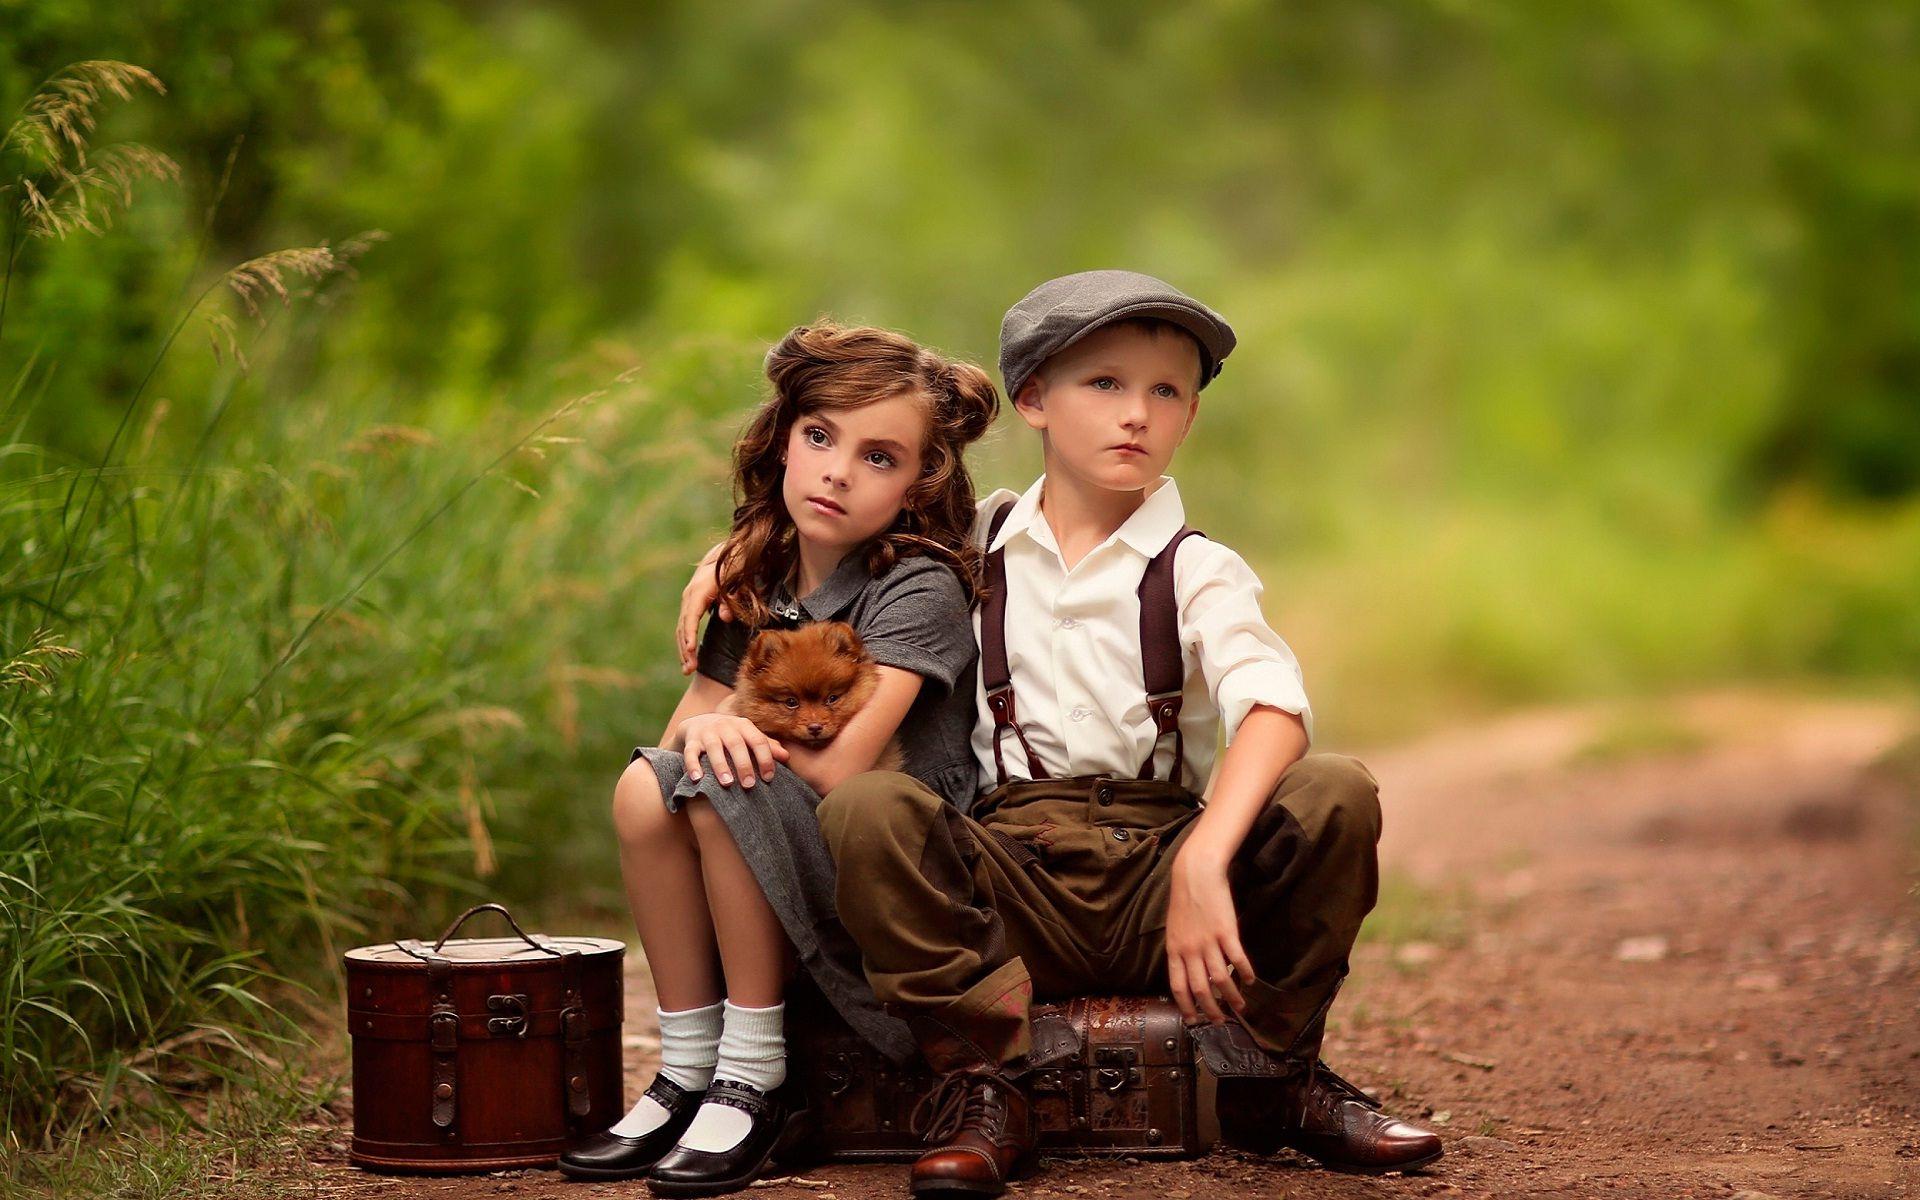 Cute Little Couple Image Full HD Free Of Adorable, Aron